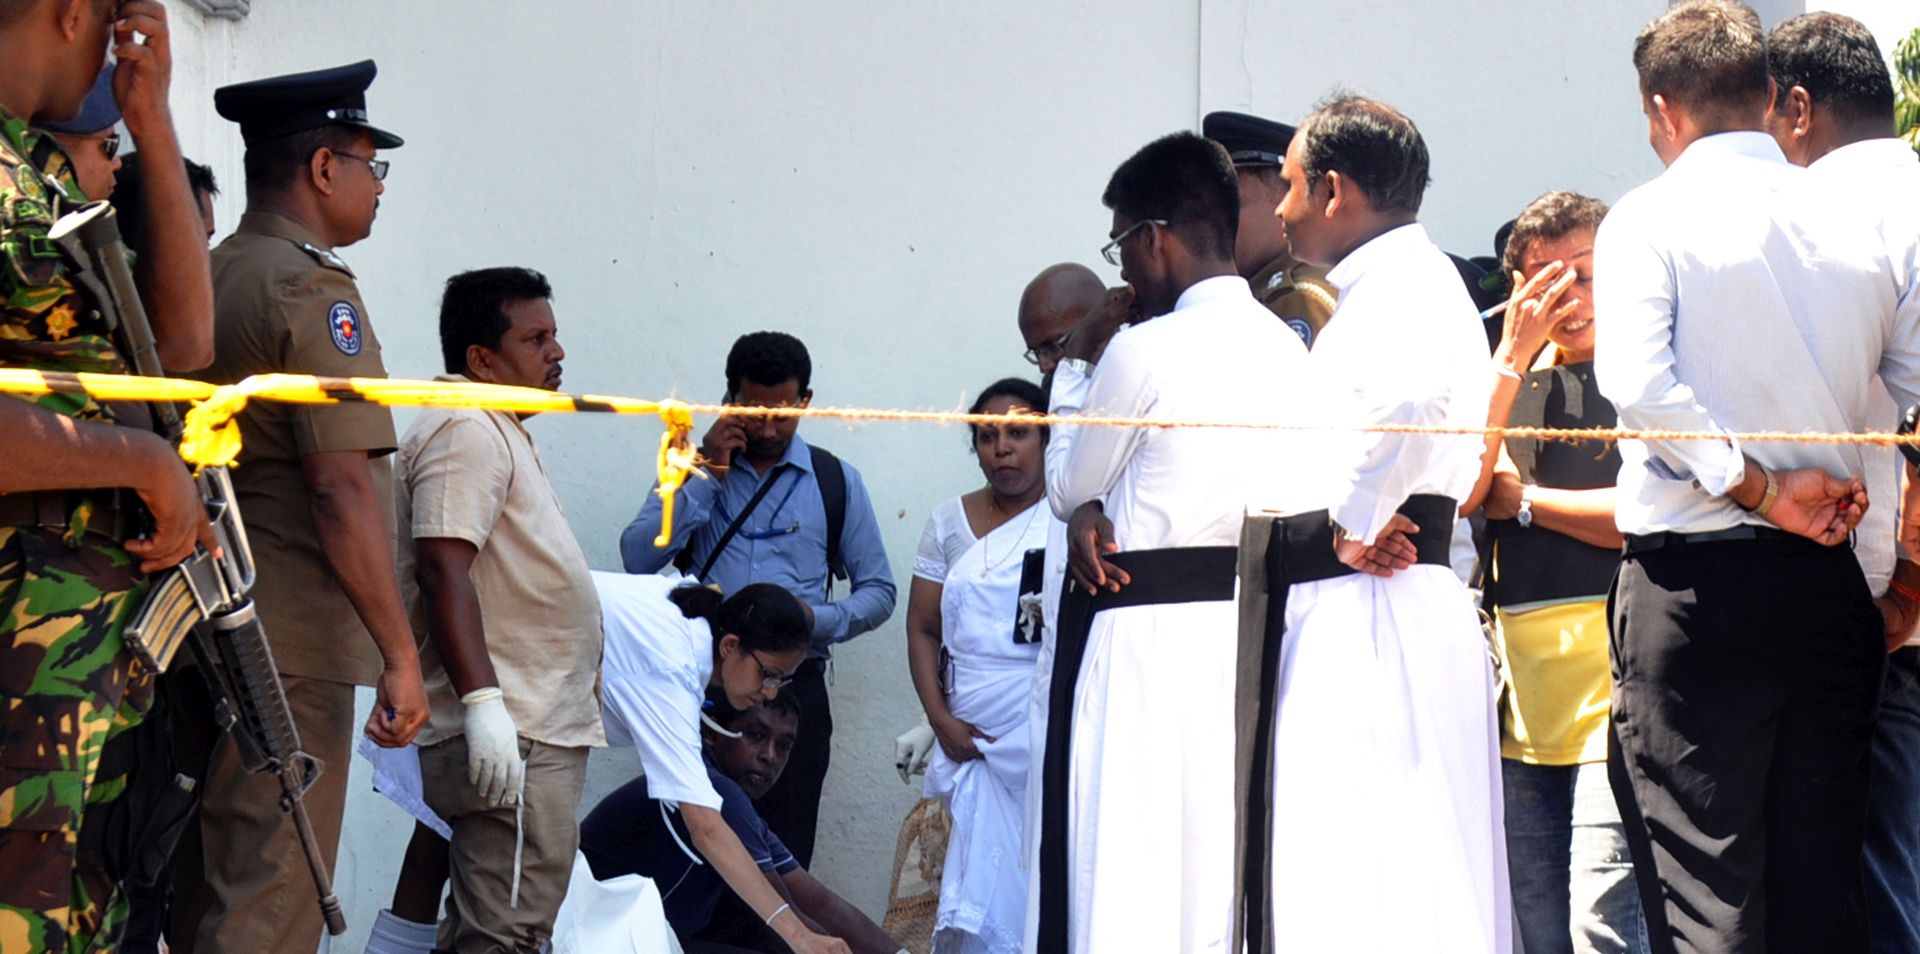 epa07519598 Policemen and priests look on as rescue workers evacuate remains of victims at the scene after an explosion hit at St Anthony's Church in Kochchikade in Colombo, Sri Lanka, 21 April 2019. According to news reports at least 138 people killed and over 400 injured in a series of blasts during the Easter Sunday service at St Anthony's Church in Kochchikade, Shangri-La Hotel and Kingsbury Hotel with many more places. EPA/M.A. PUSHPA KUMARA